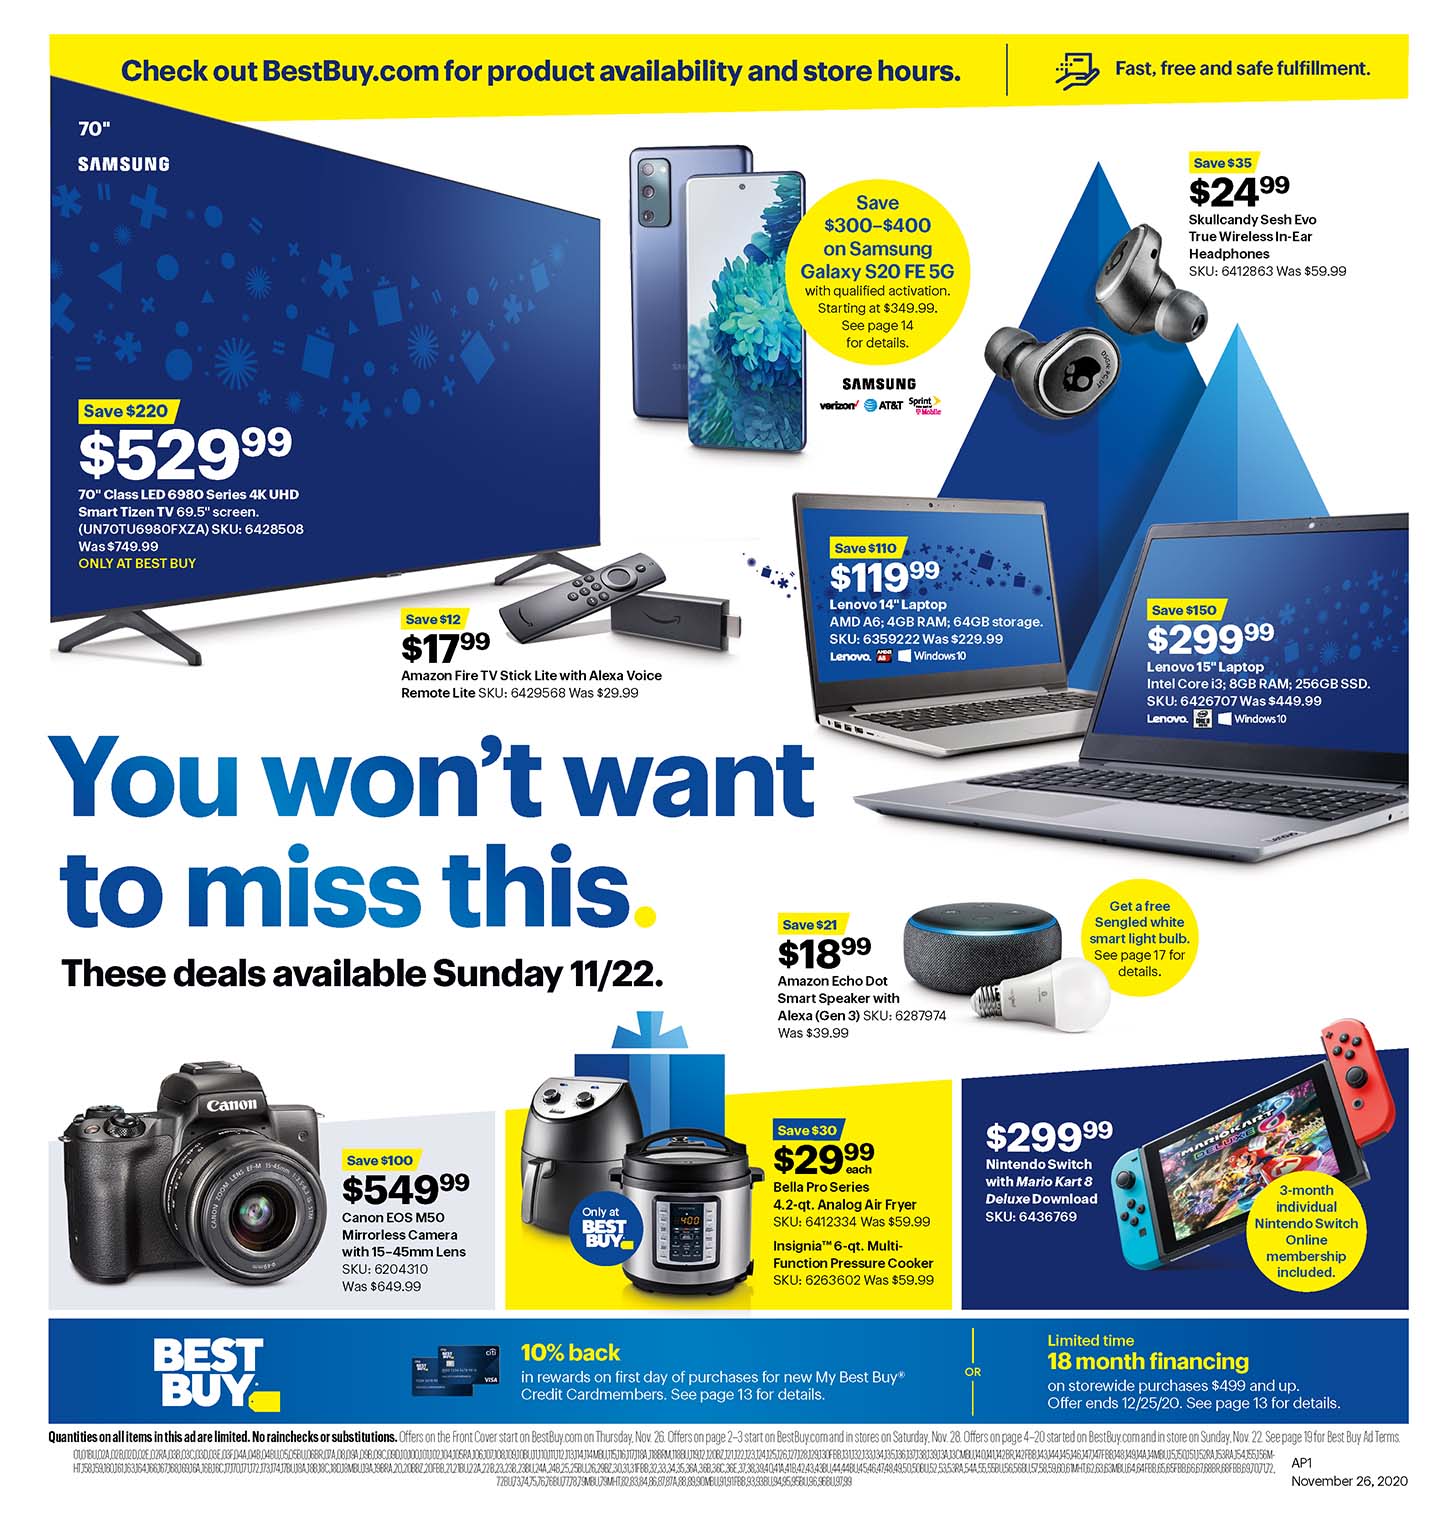 Best Buy Black Friday Ad 2020 - What To Buy On Black Friday Deals